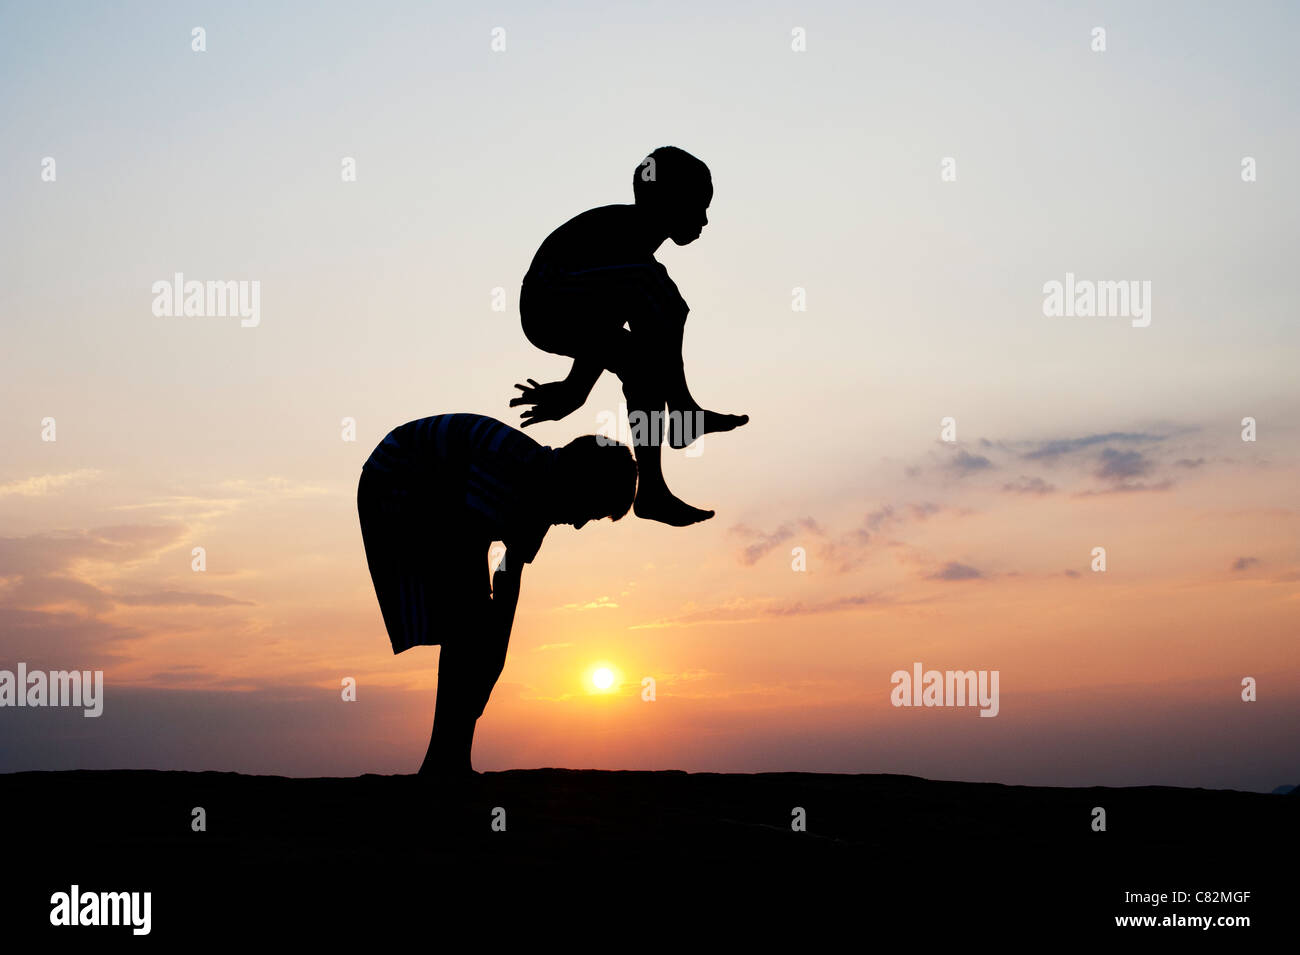 Silhouette of young Indian boys playing leap frog against at sunset. India Stock Photo